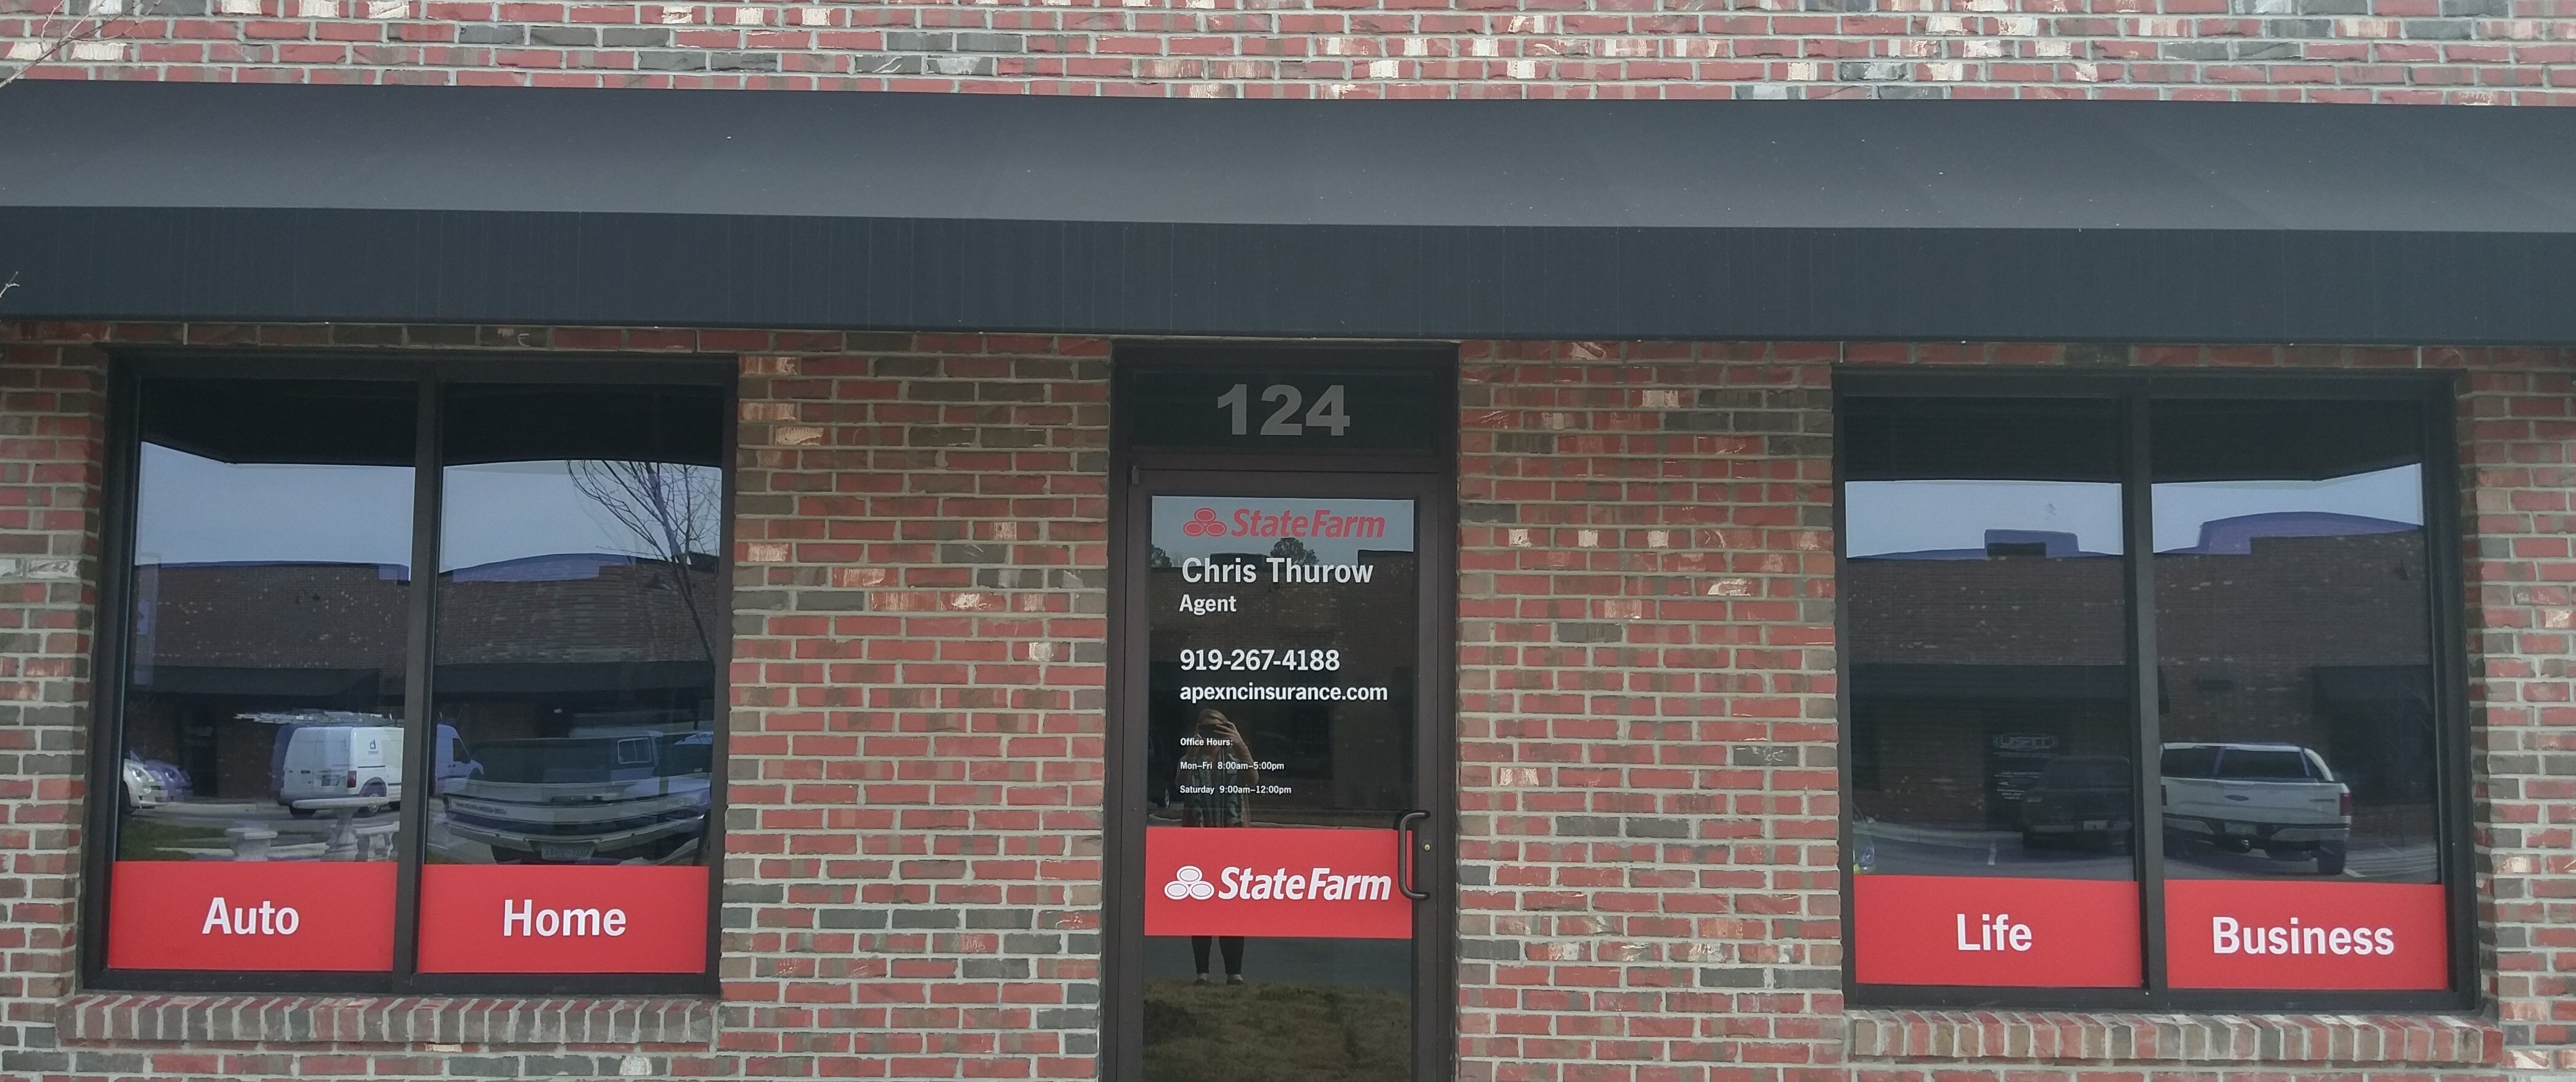 State Farm window and door text clings